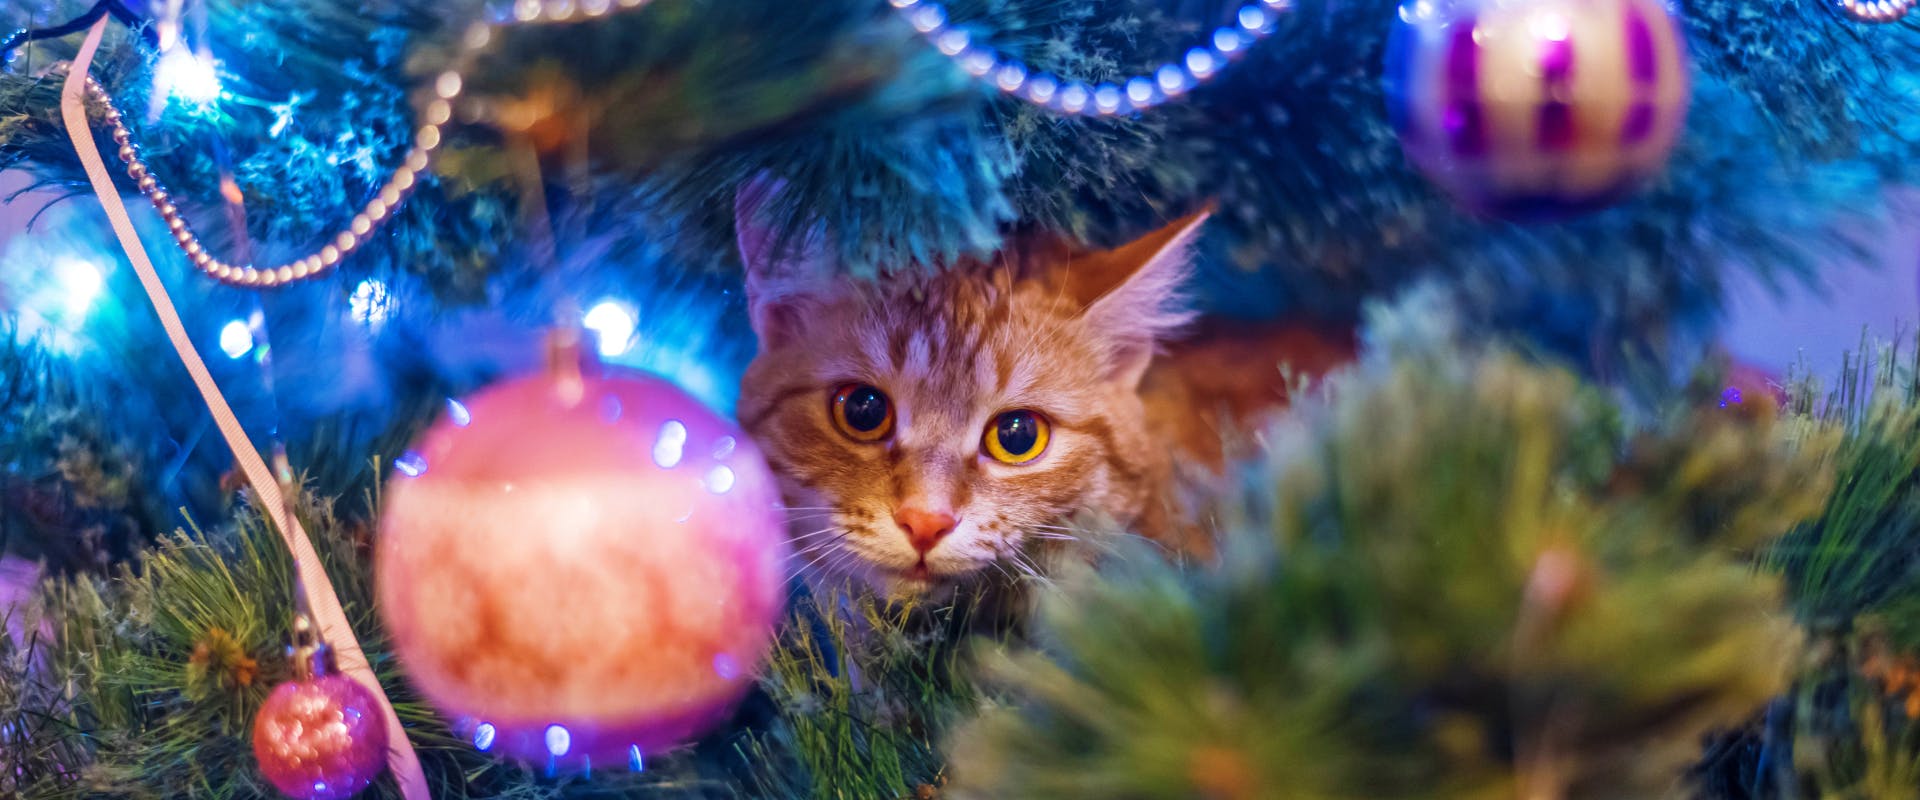 a ginger cat hidden in a christmas tree surround by lights and decorations